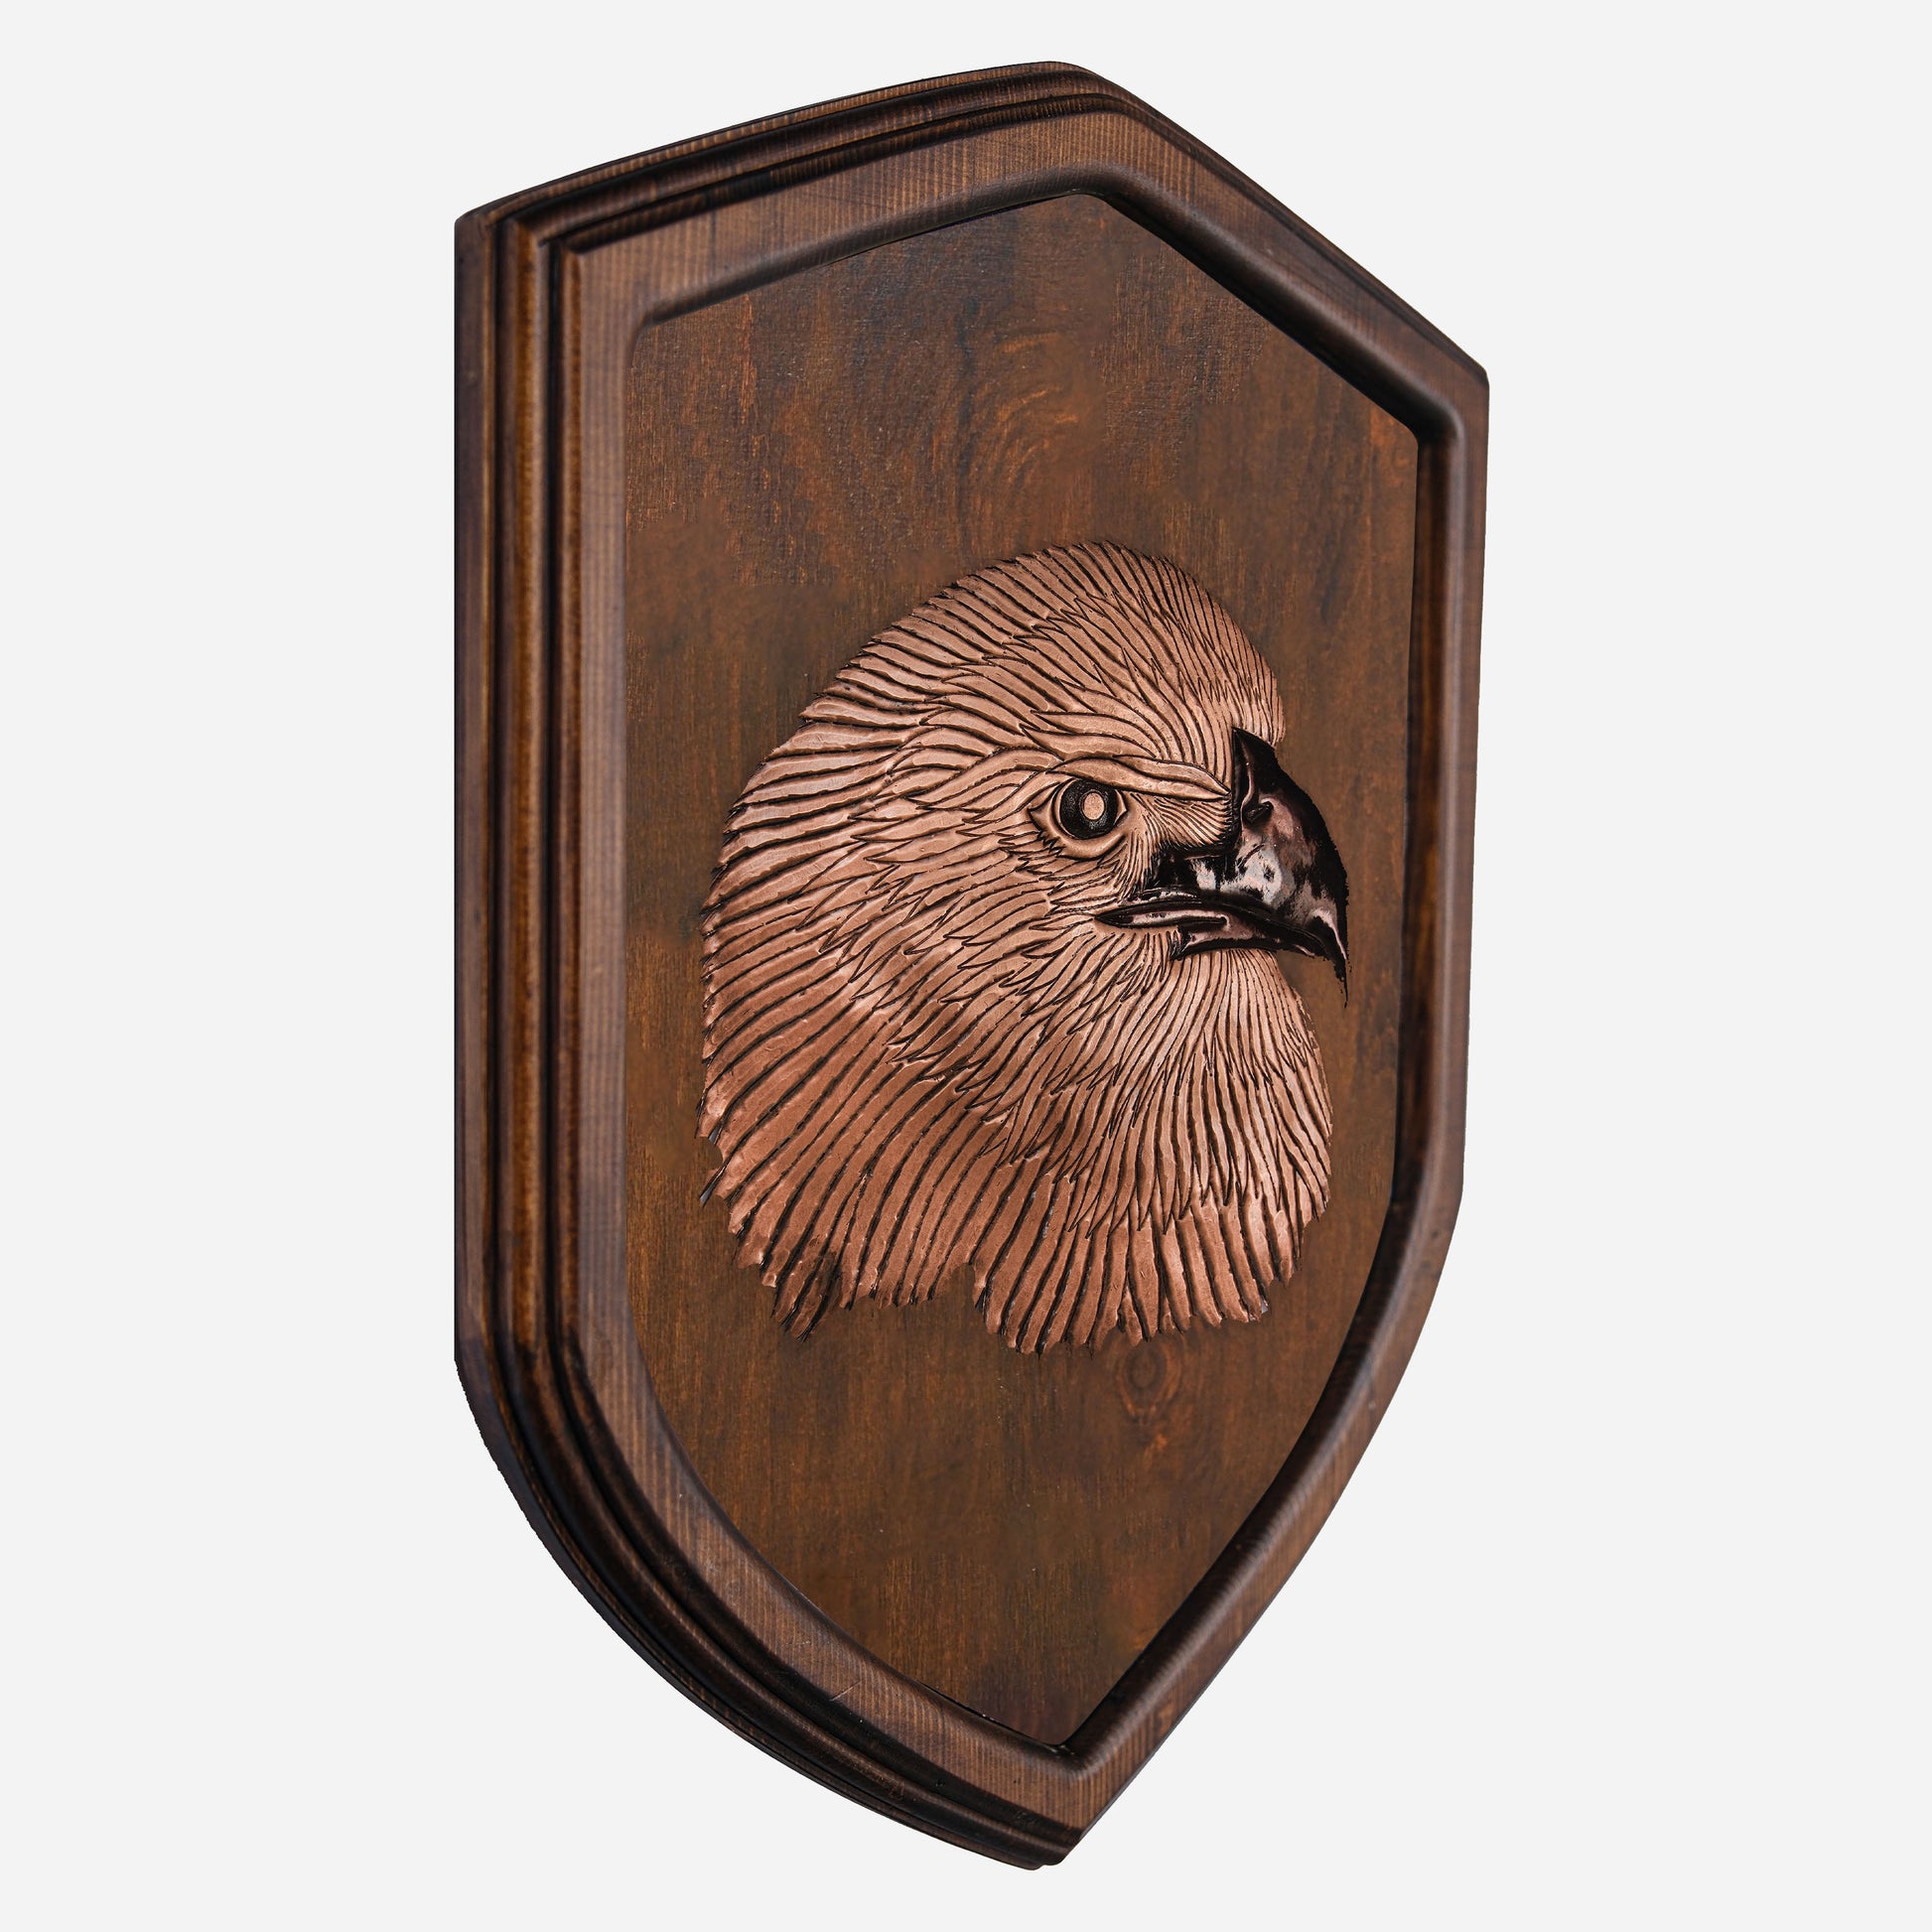 Copper Eagle Head on Wood Plaque